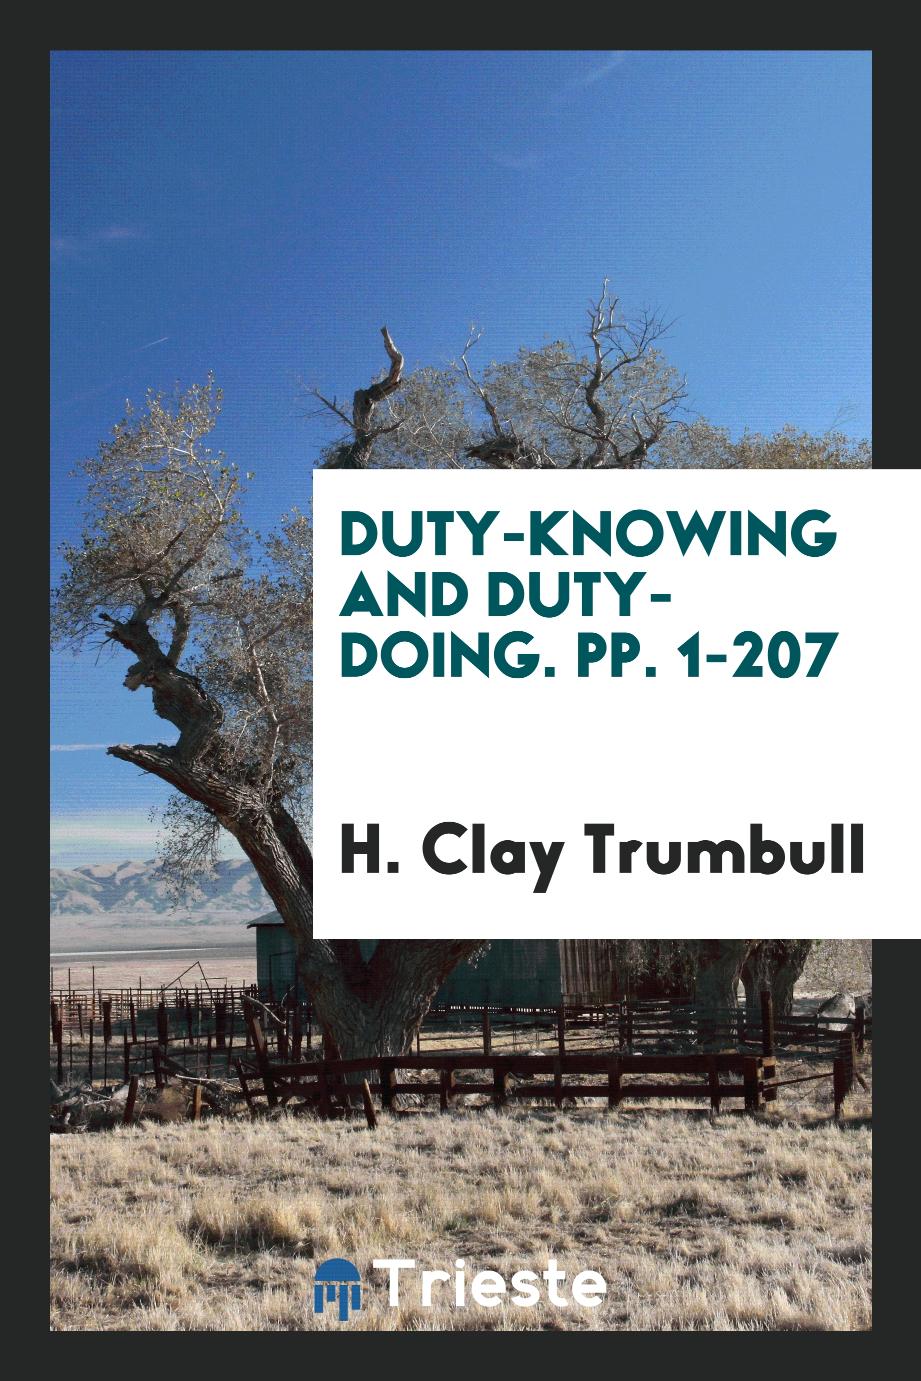 H. Clay Trumbull - Duty-Knowing and Duty-Doing. pp. 1-207